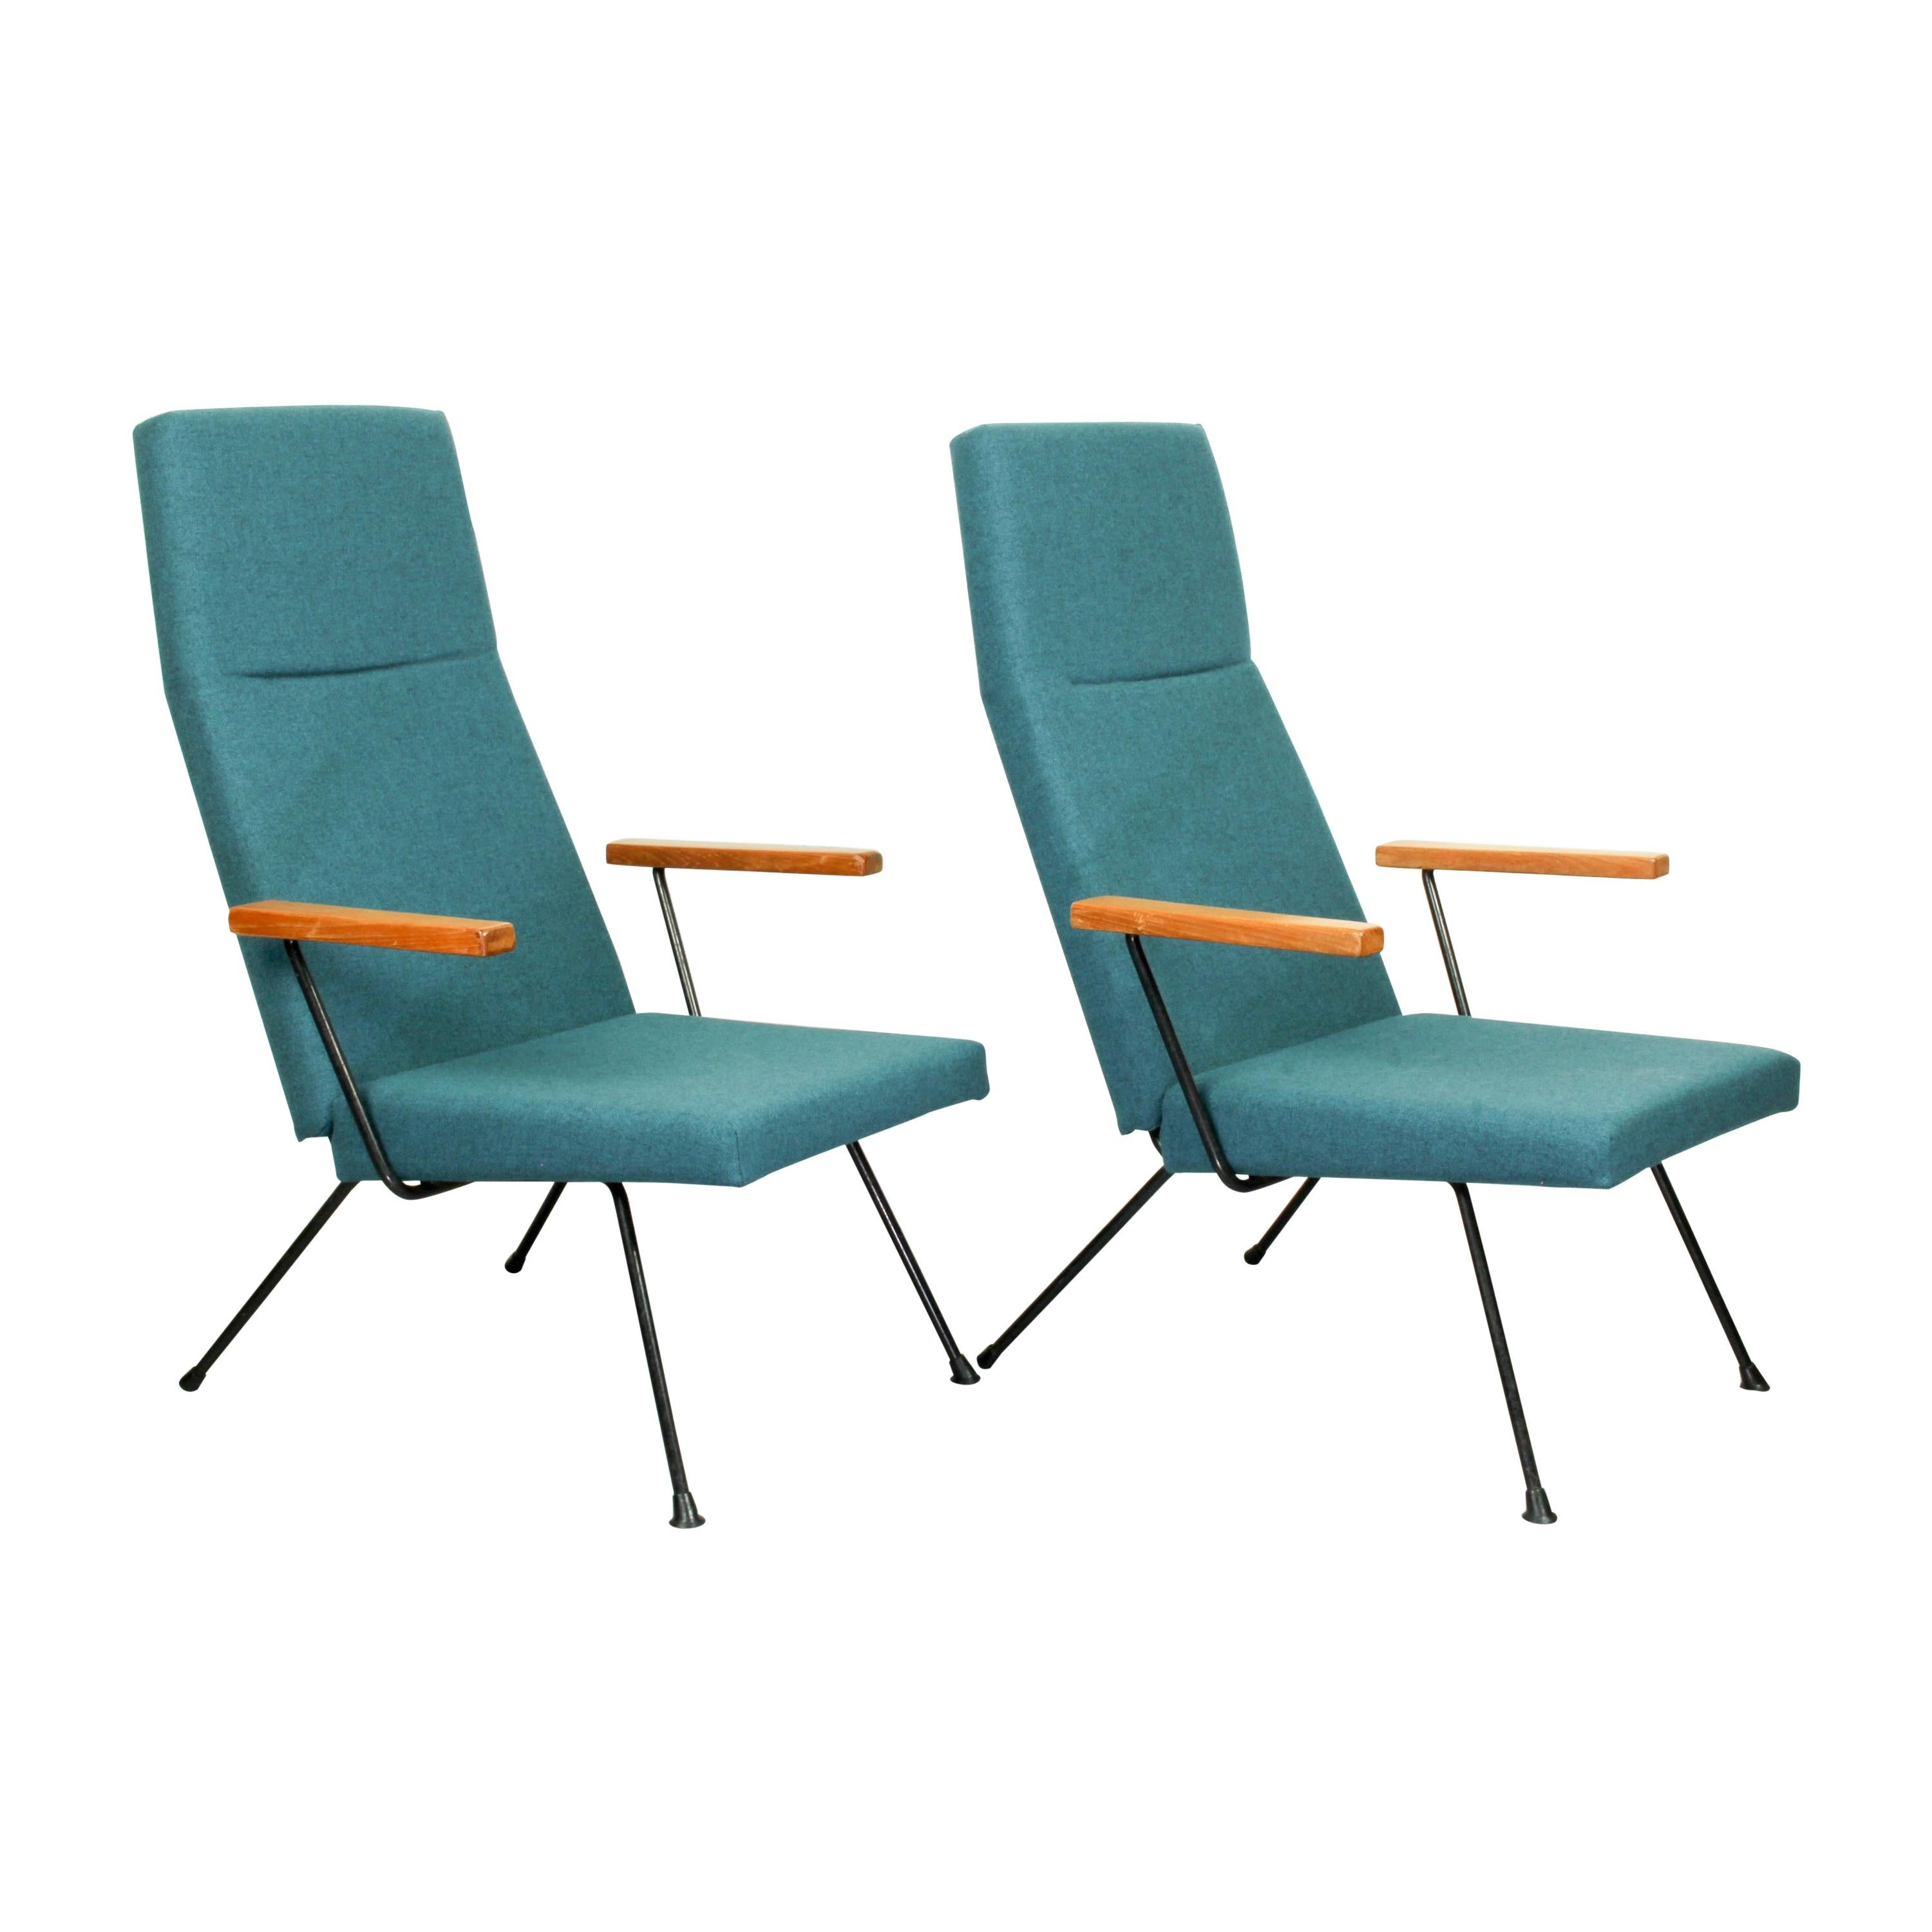 Set of Two A.R. Cordemeyer Lounge Chair Model 1410 by Gispen, 1959